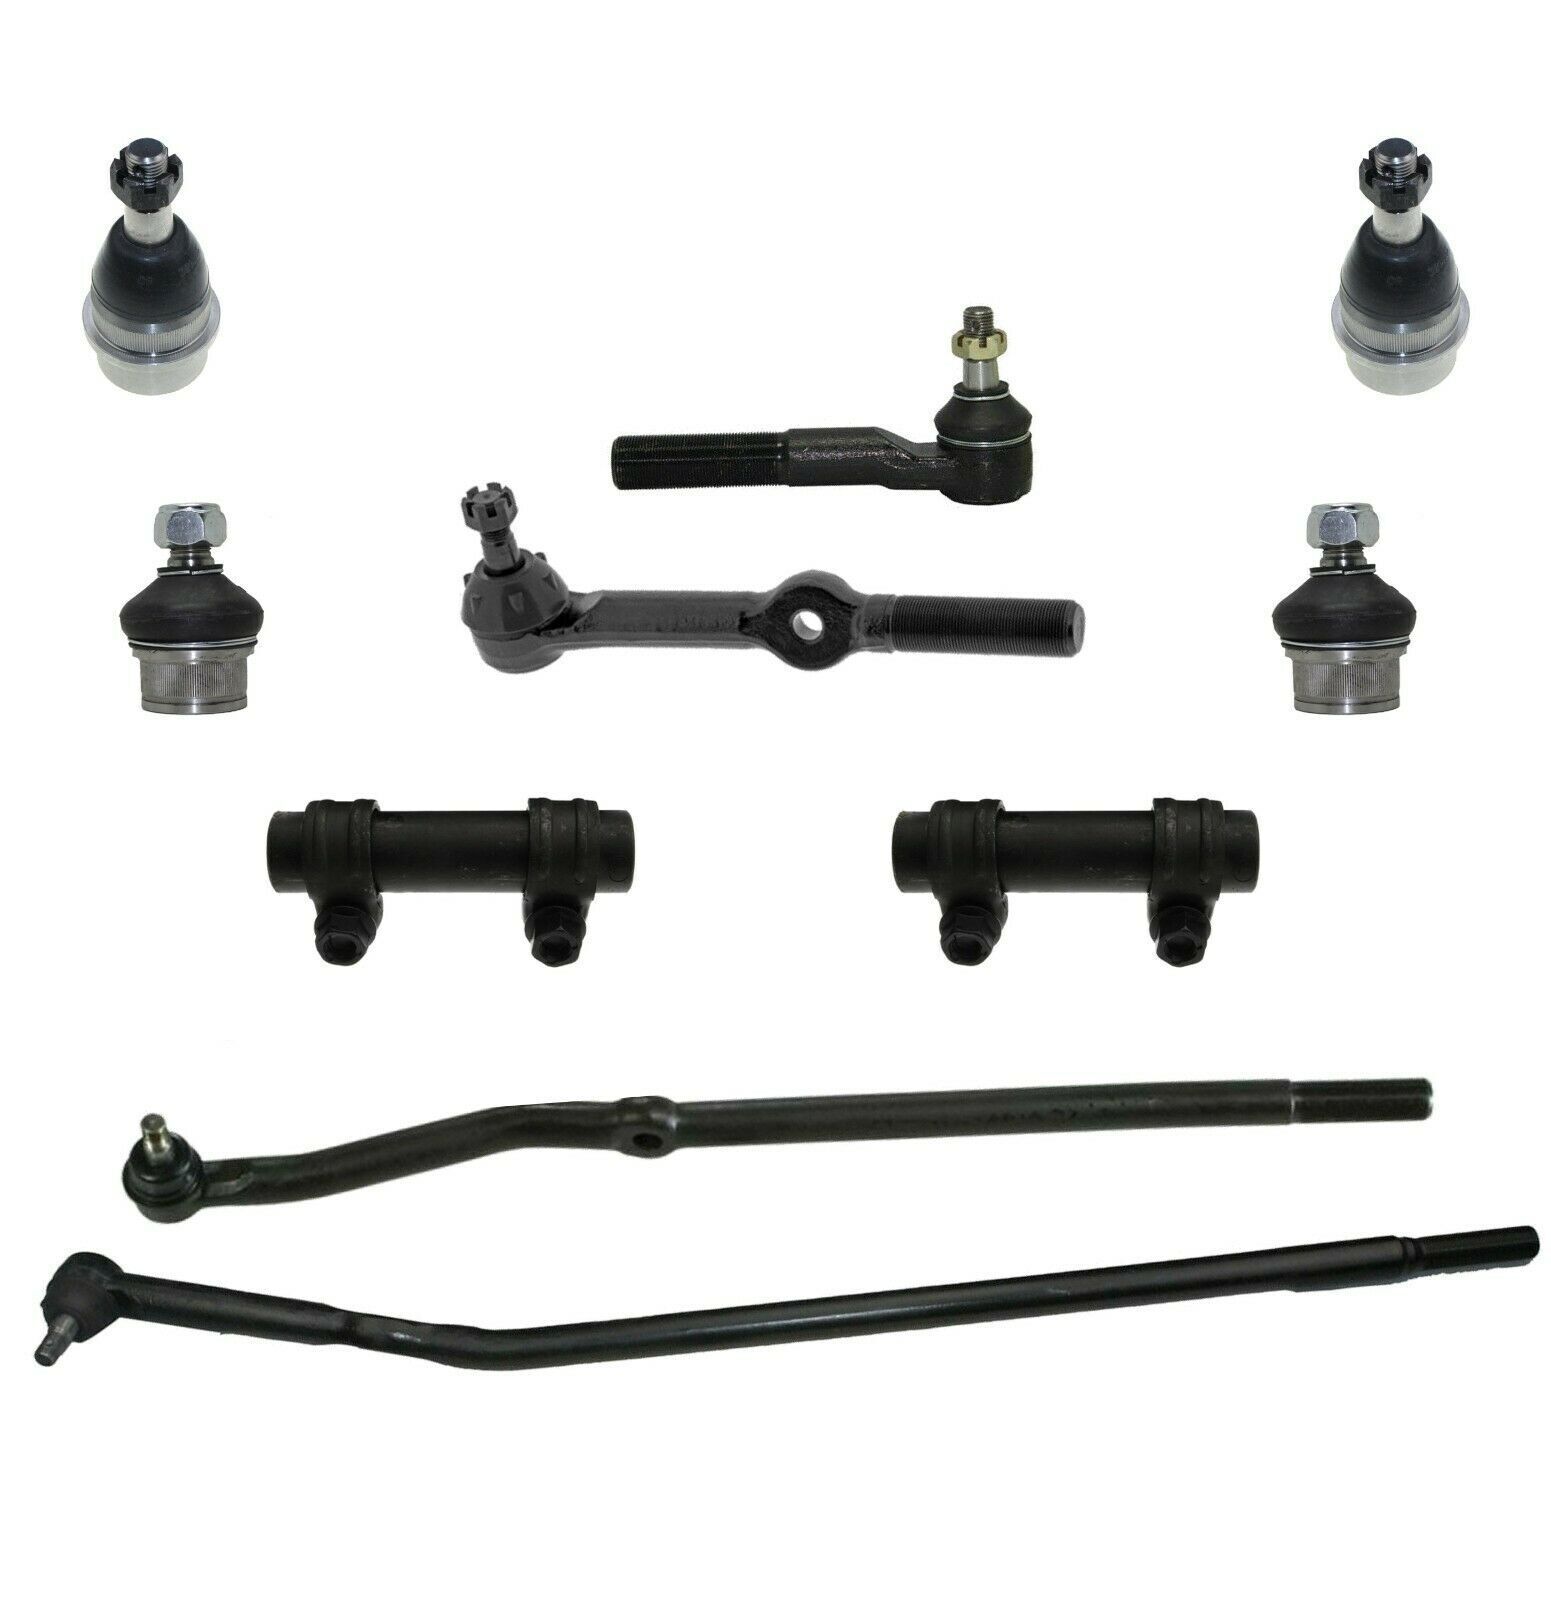 Front Ball Joint Tie Rod  Drag Link Steering Suspension Kit for Ram 1500 2500